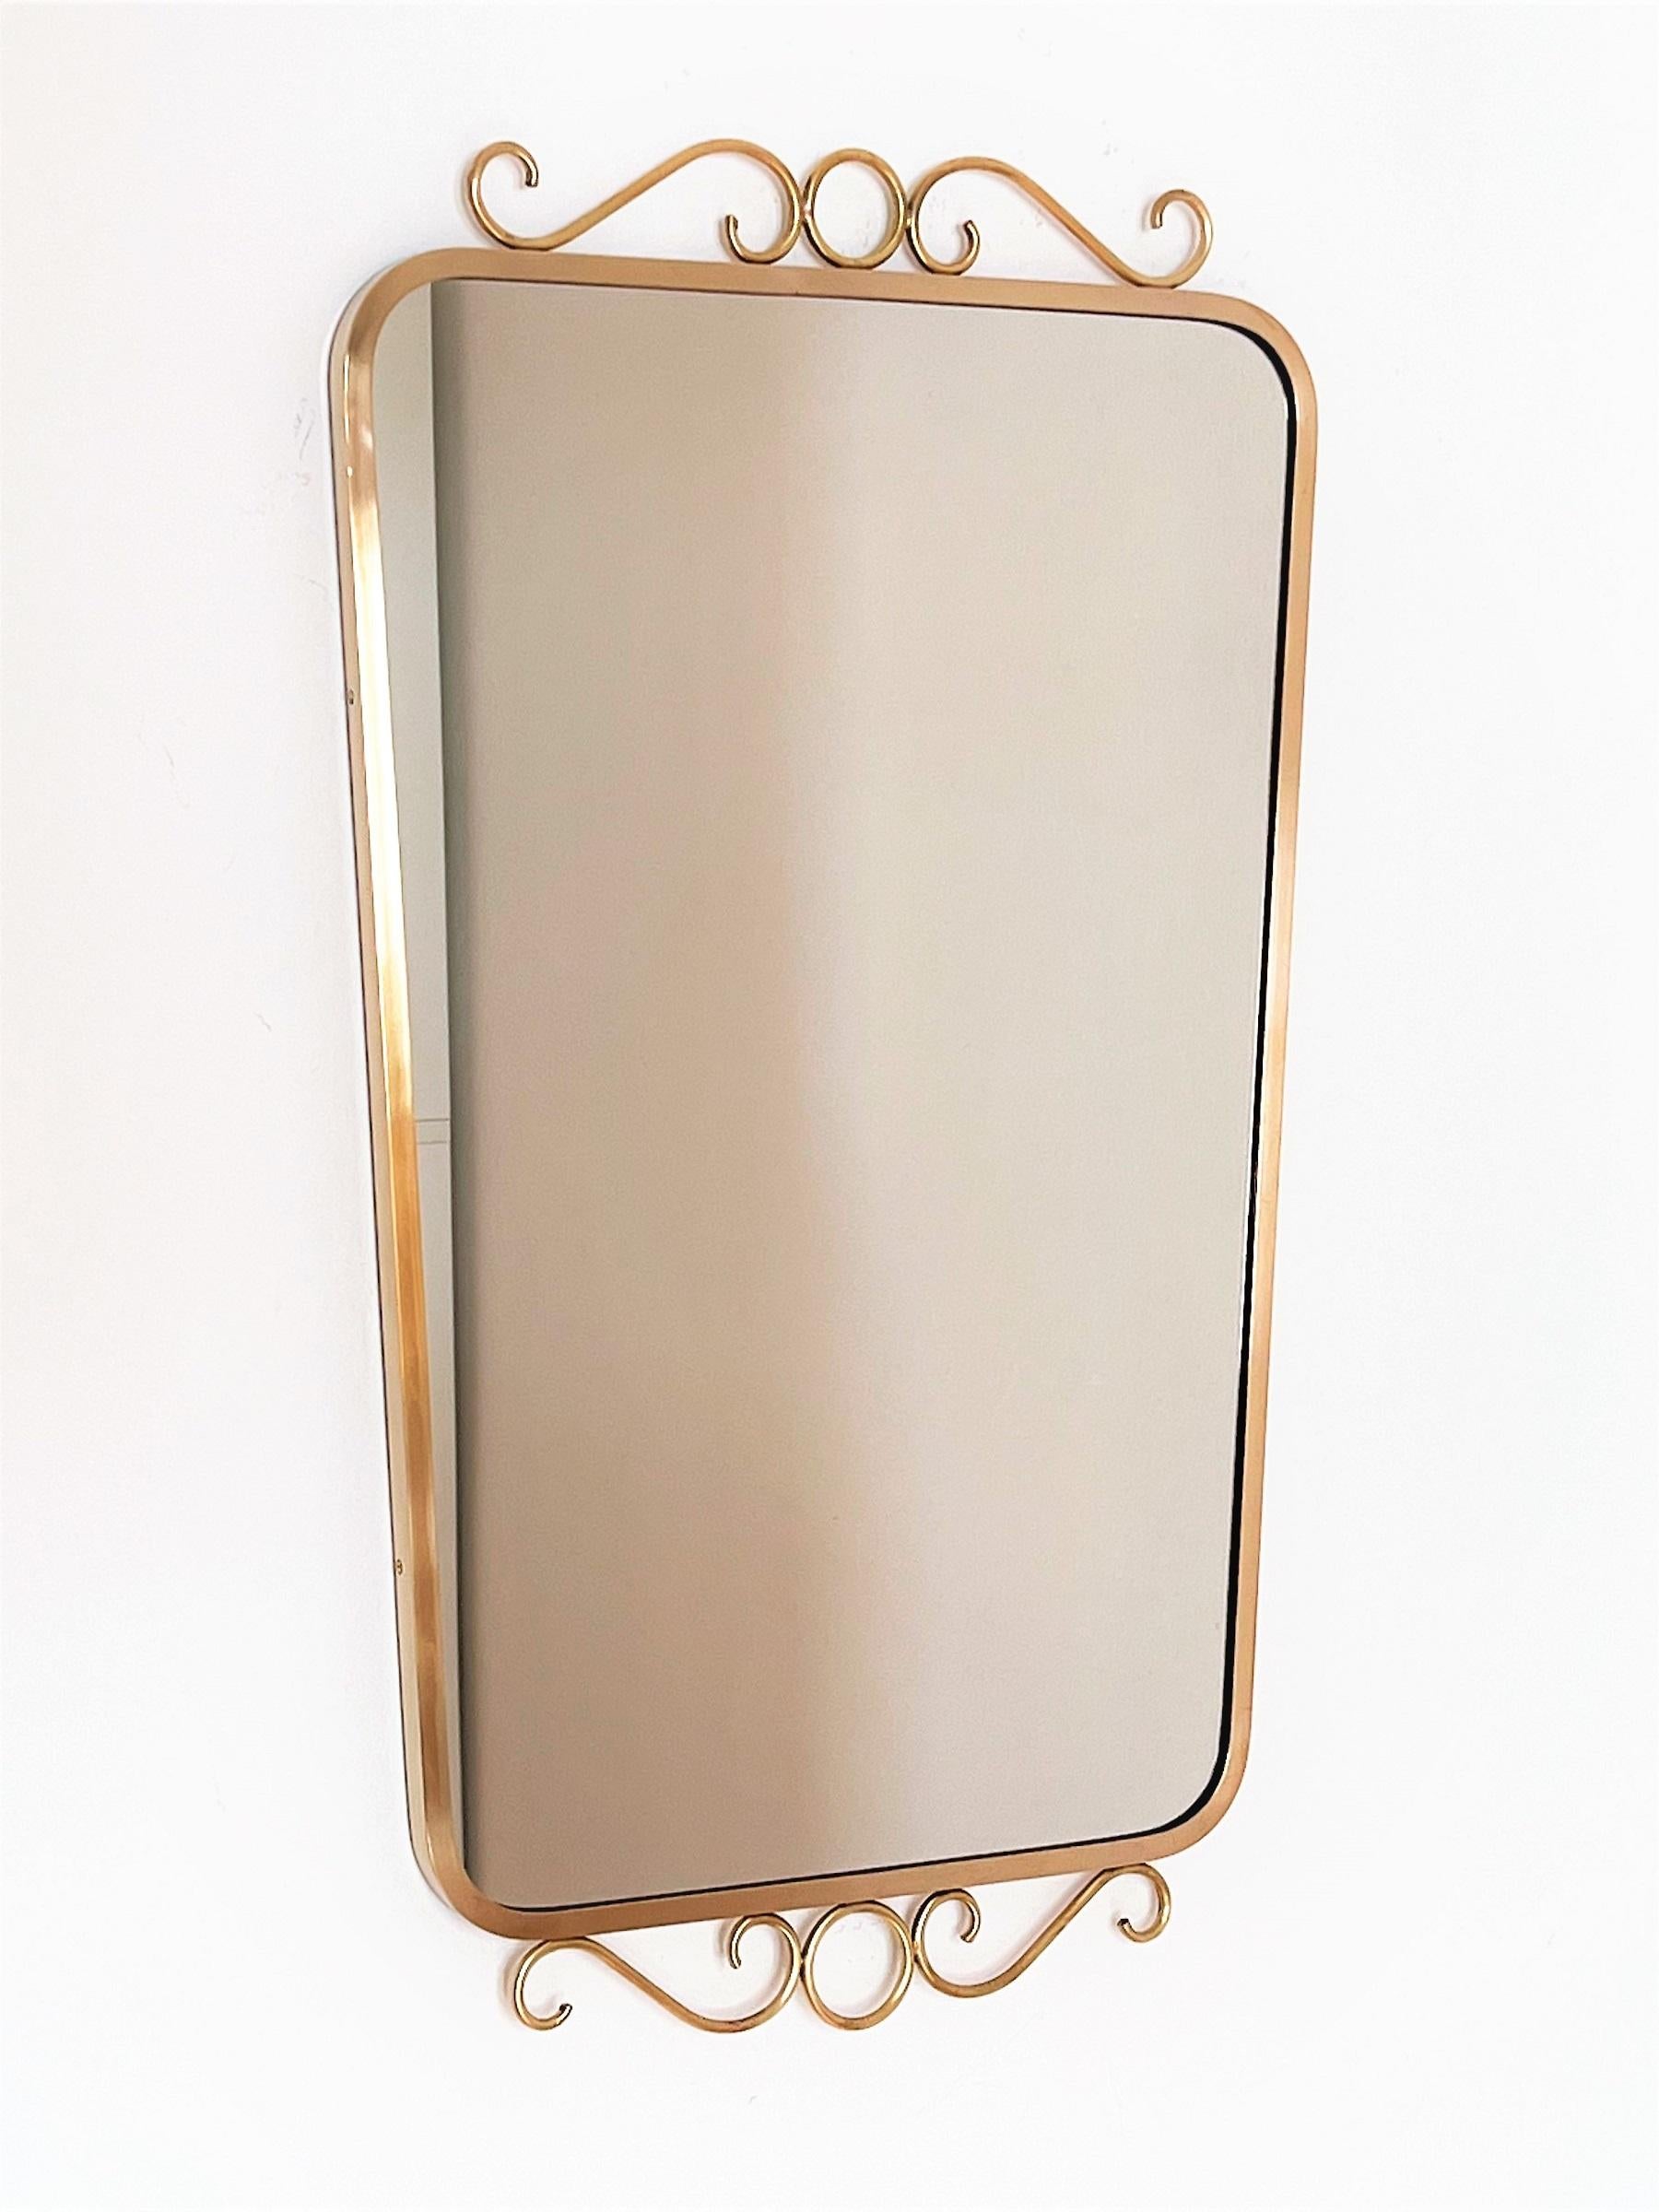 Late 20th Century Italian Mid-Century Crystal and Brass Mirror with Decoration, 1950s